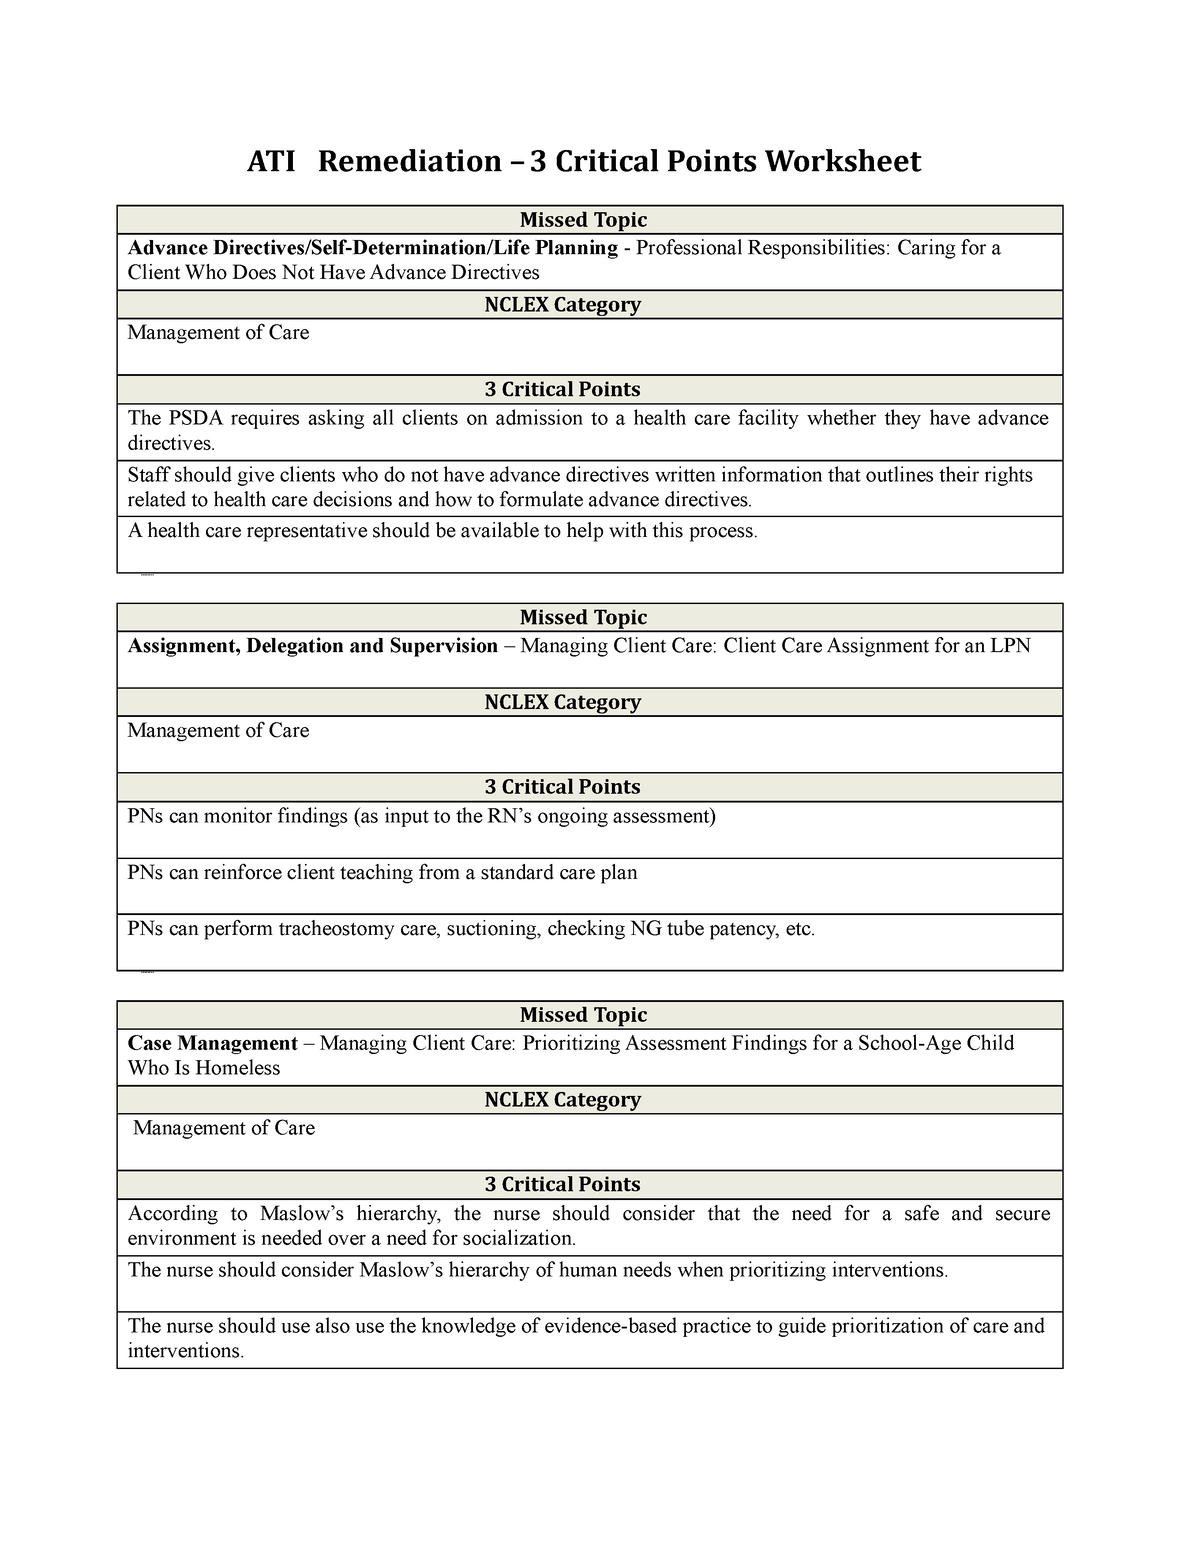 remed-ati-remediation-3-critical-points-worksheet-missed-topic